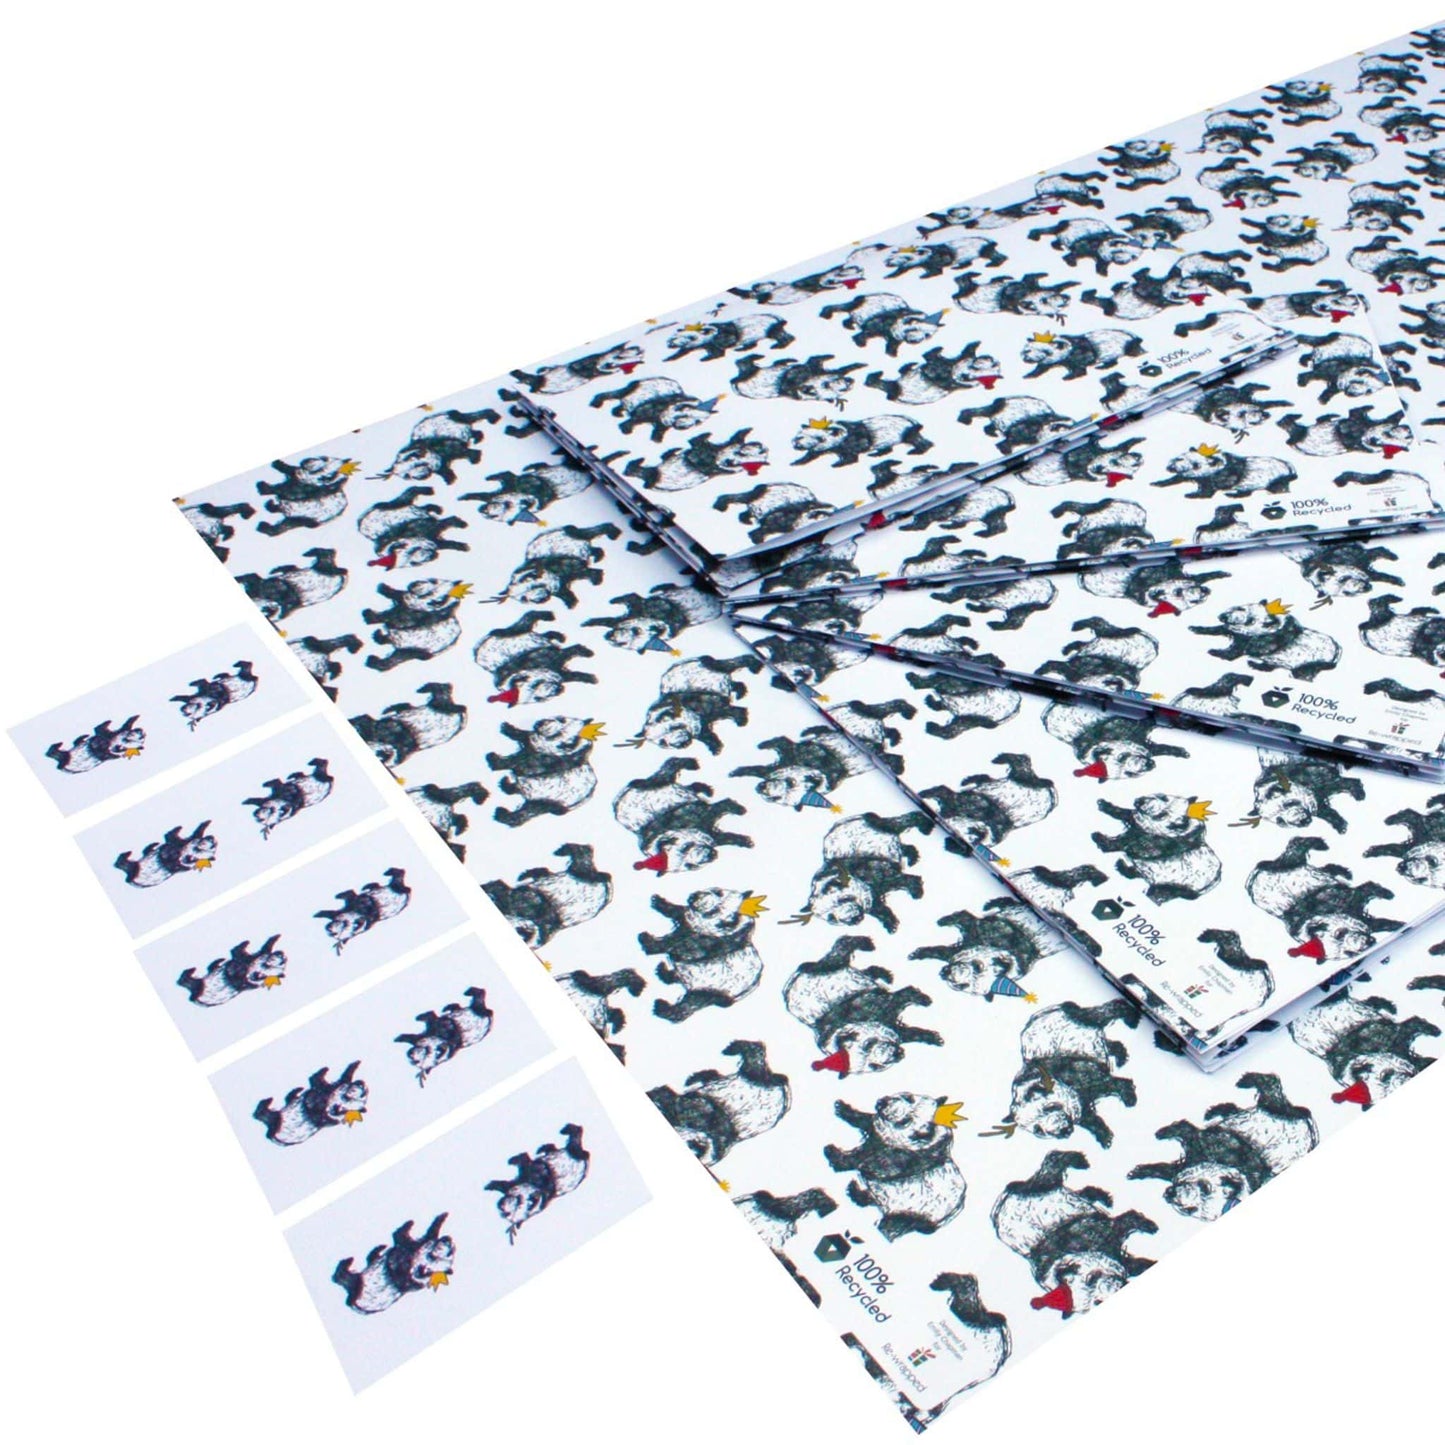 Recycled Christmas wrapping paper - pandas and hats with tags